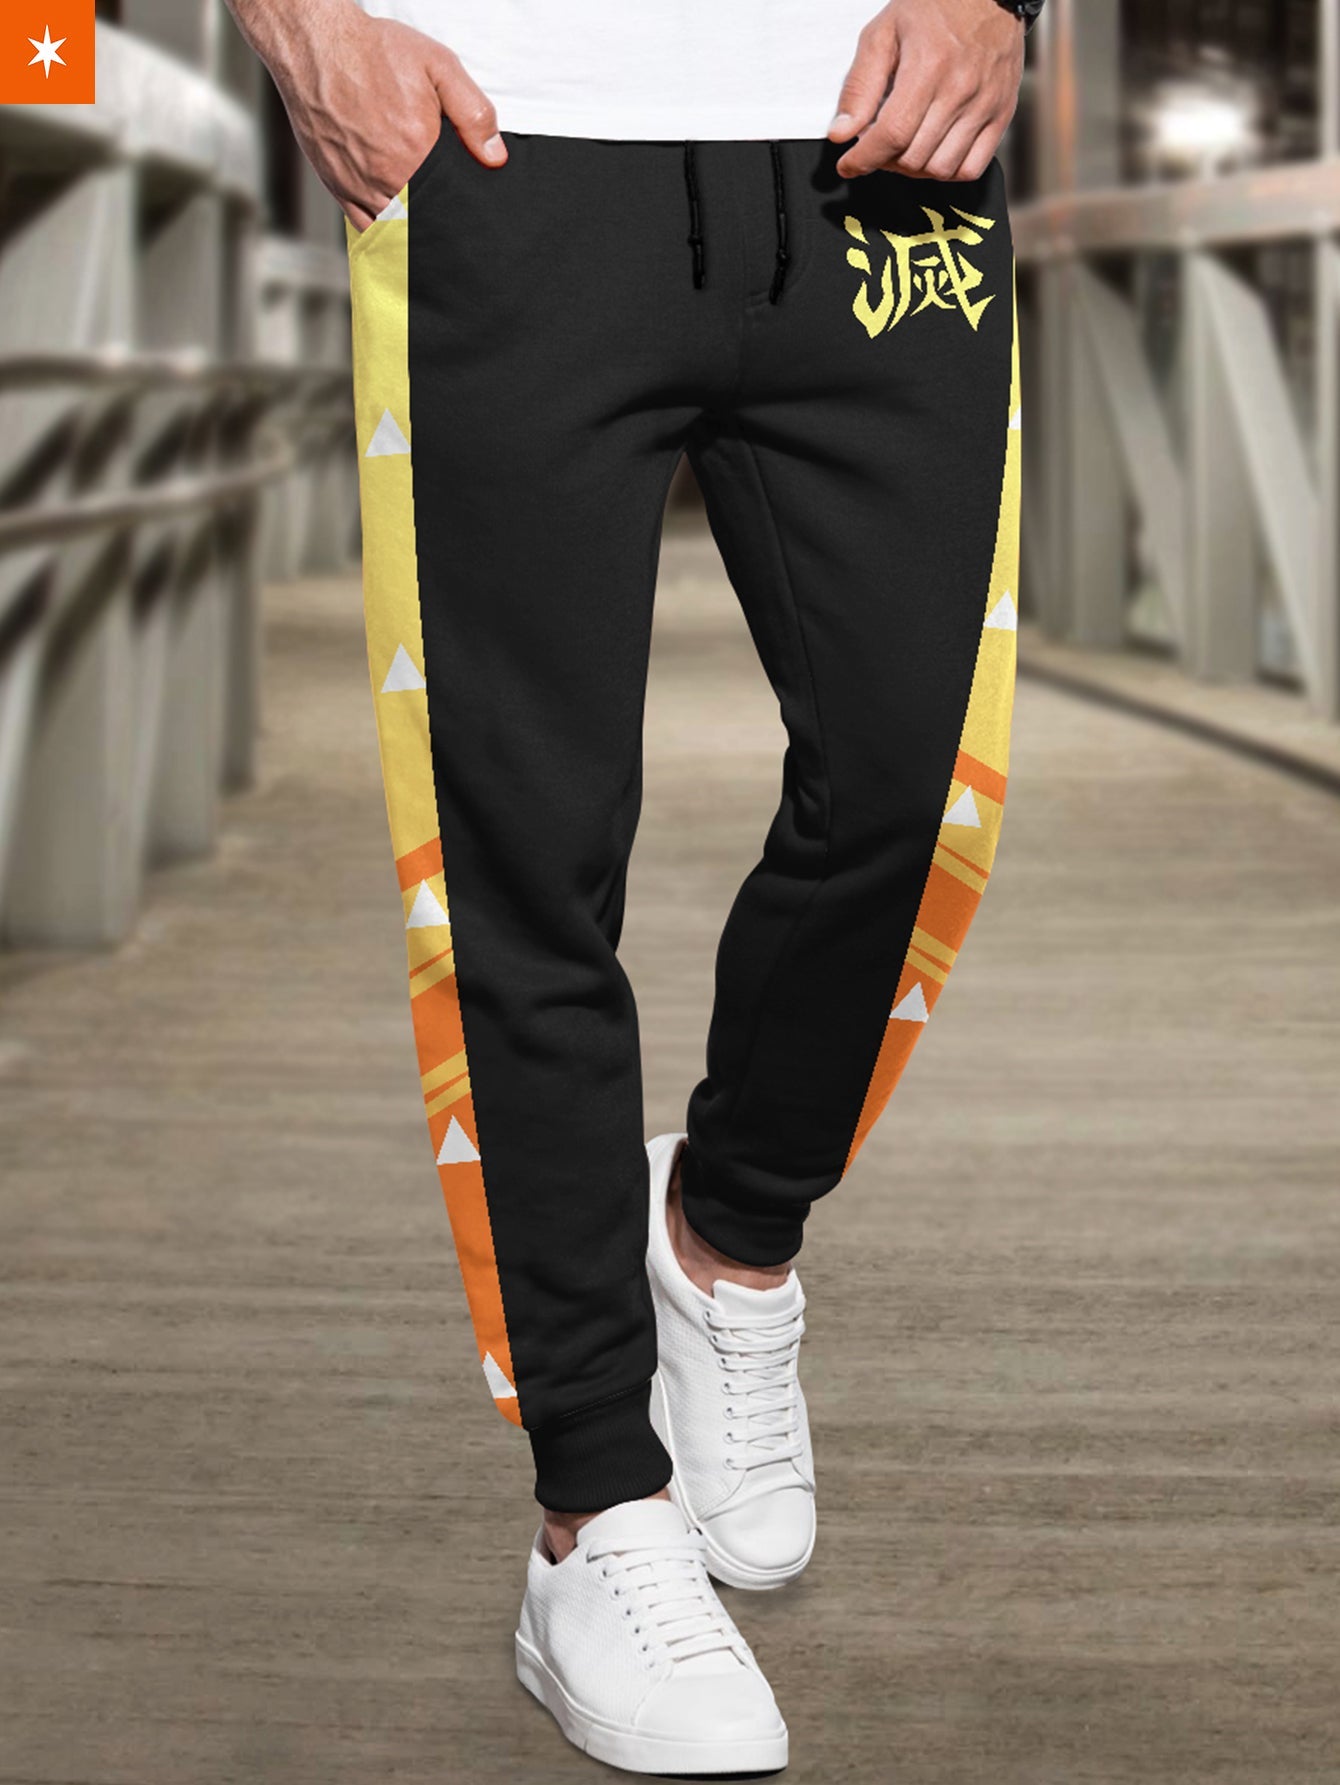 Joggers for men: Best Joggers For Men In India - The Economic Times